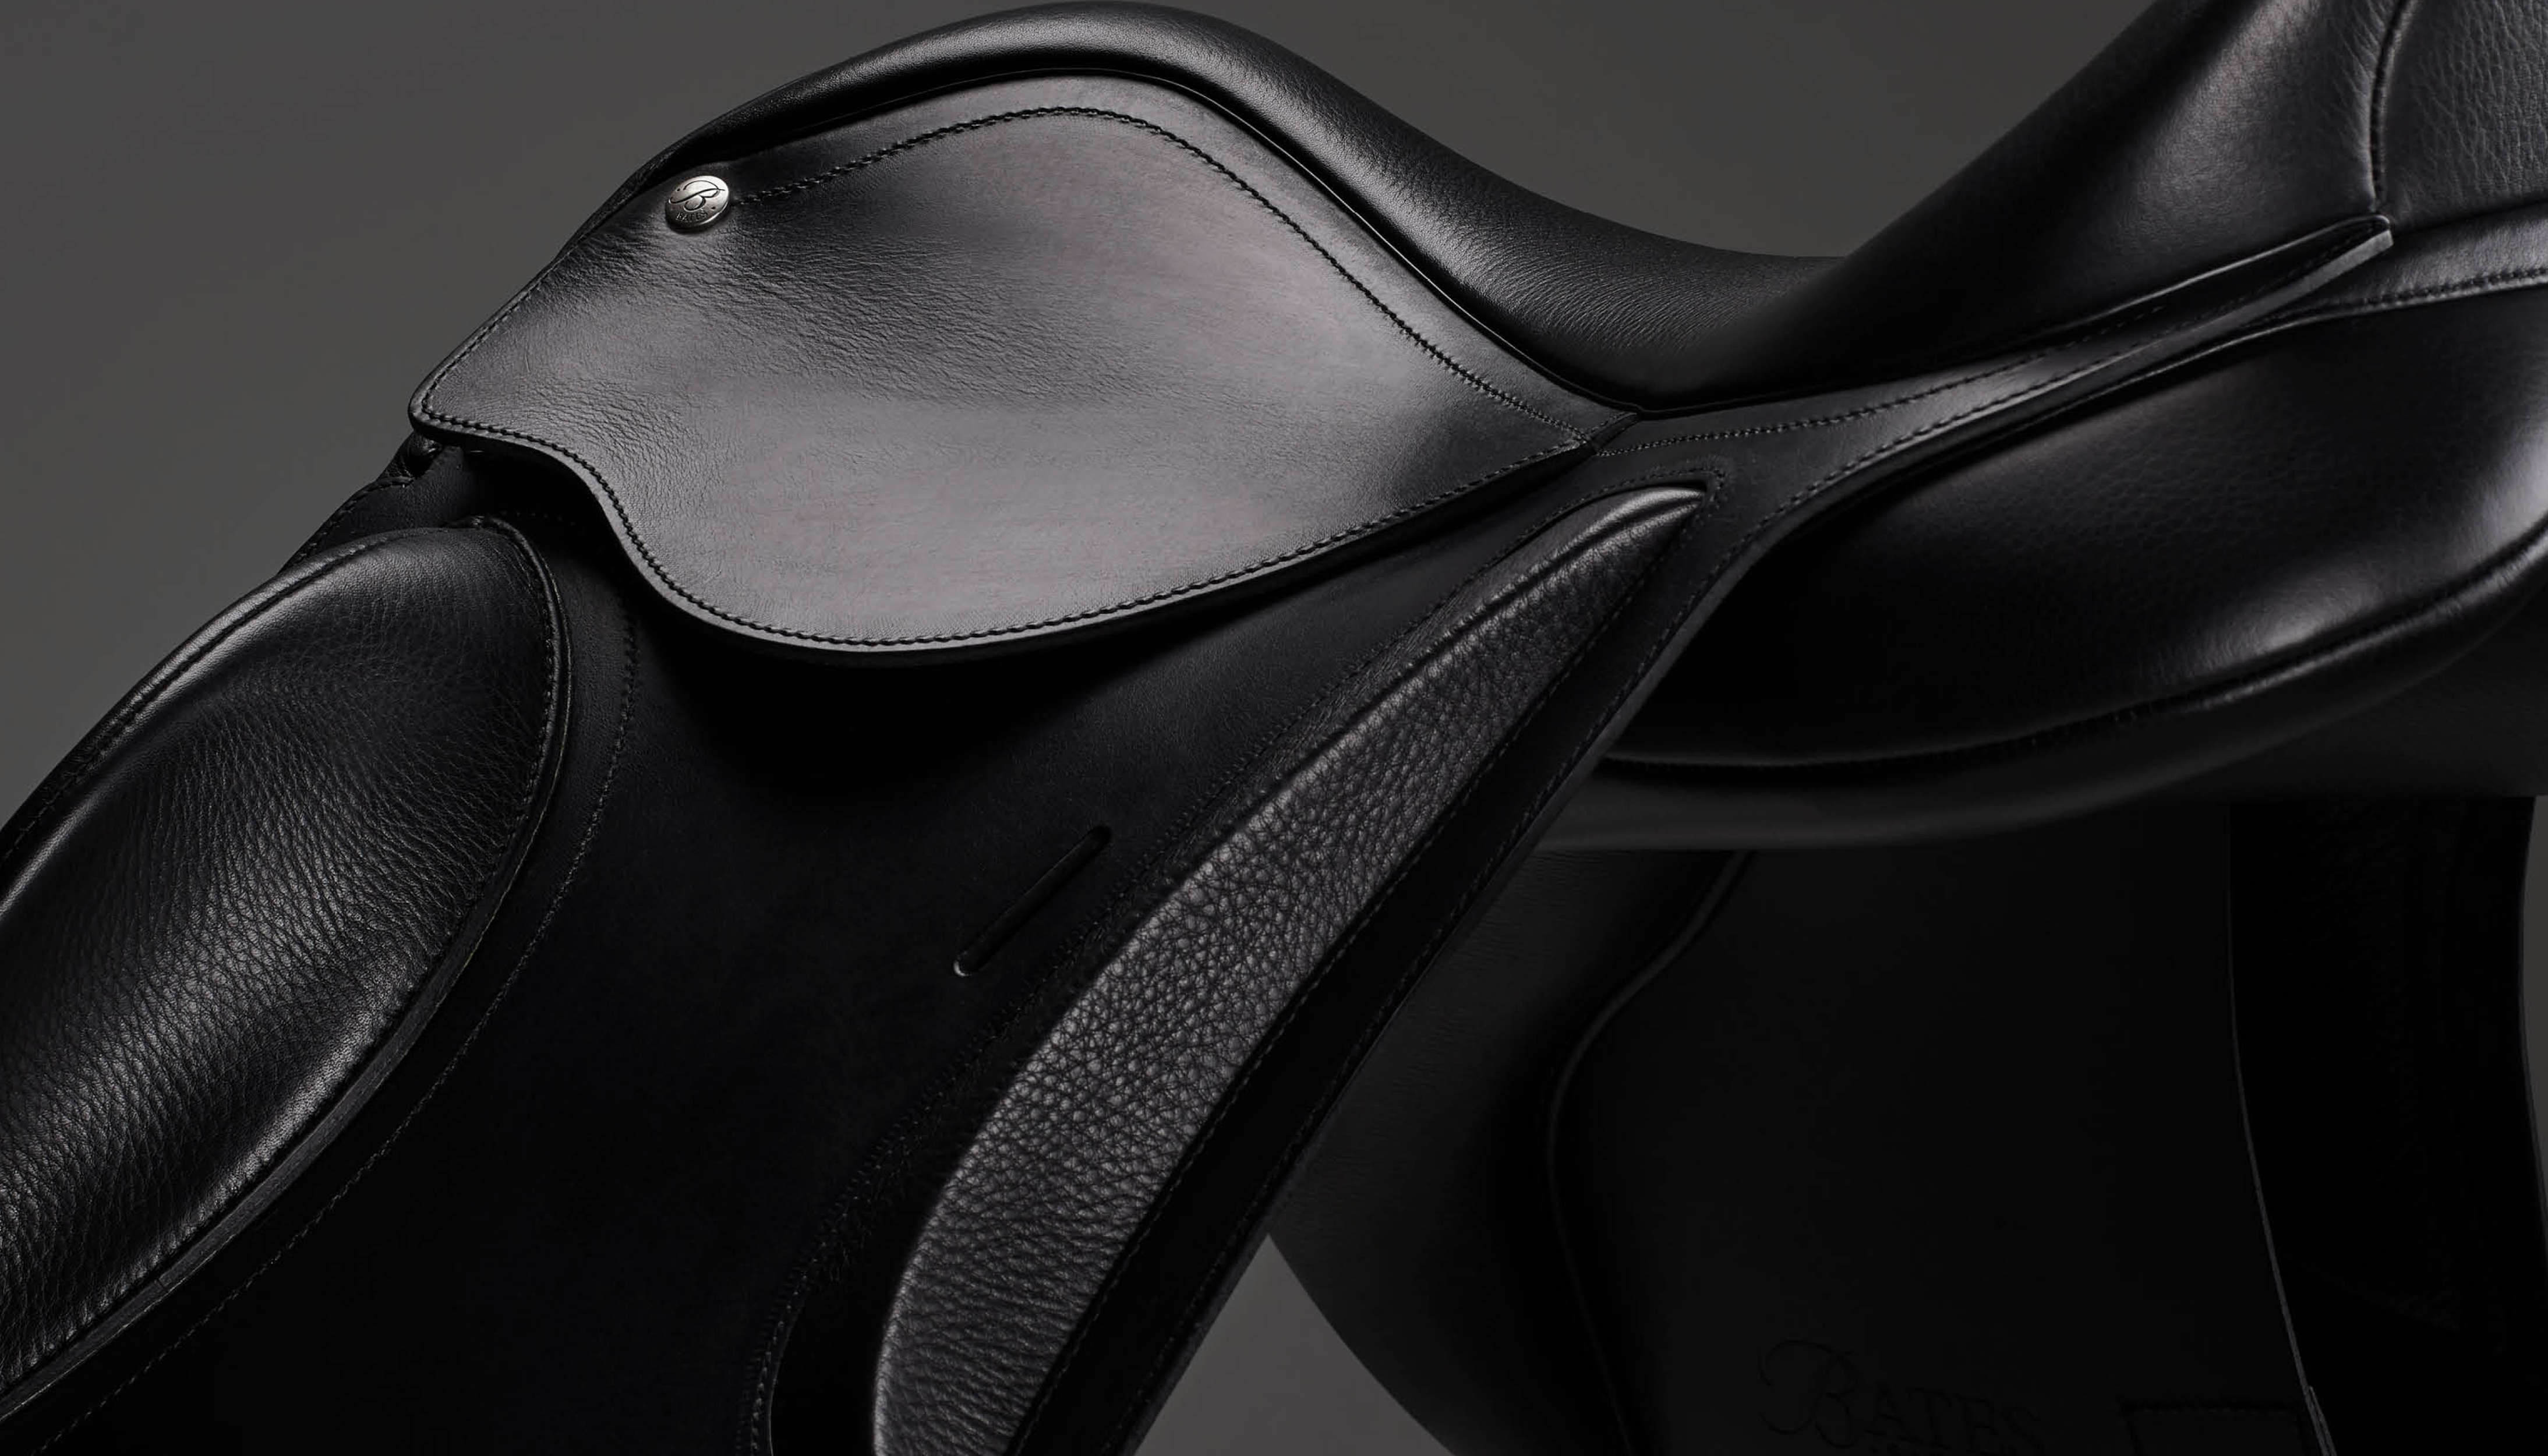 Introducing the most VERSAtile leisure saddle